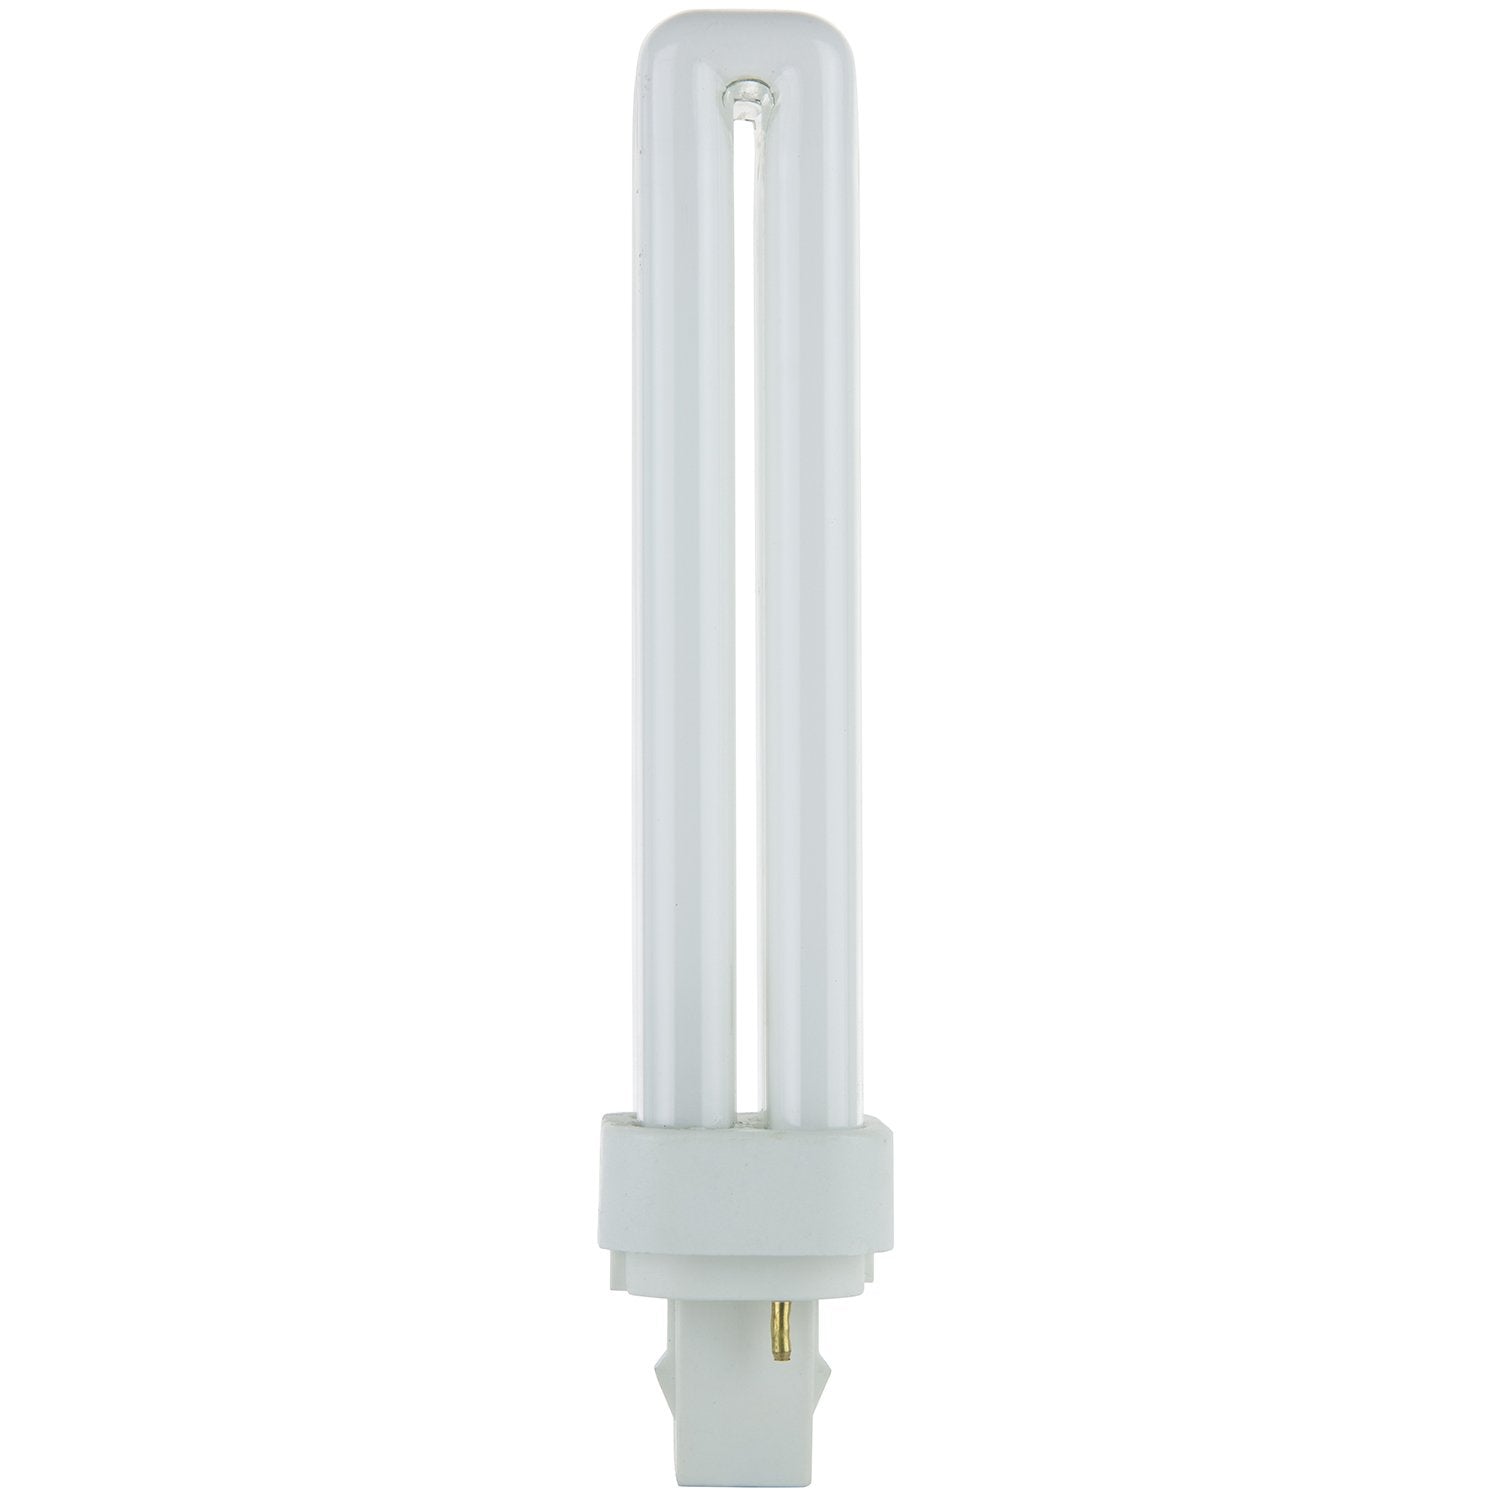 Sunlite Compact Fluorescent Plug-In 2-Pin Light Bulb  - Like New